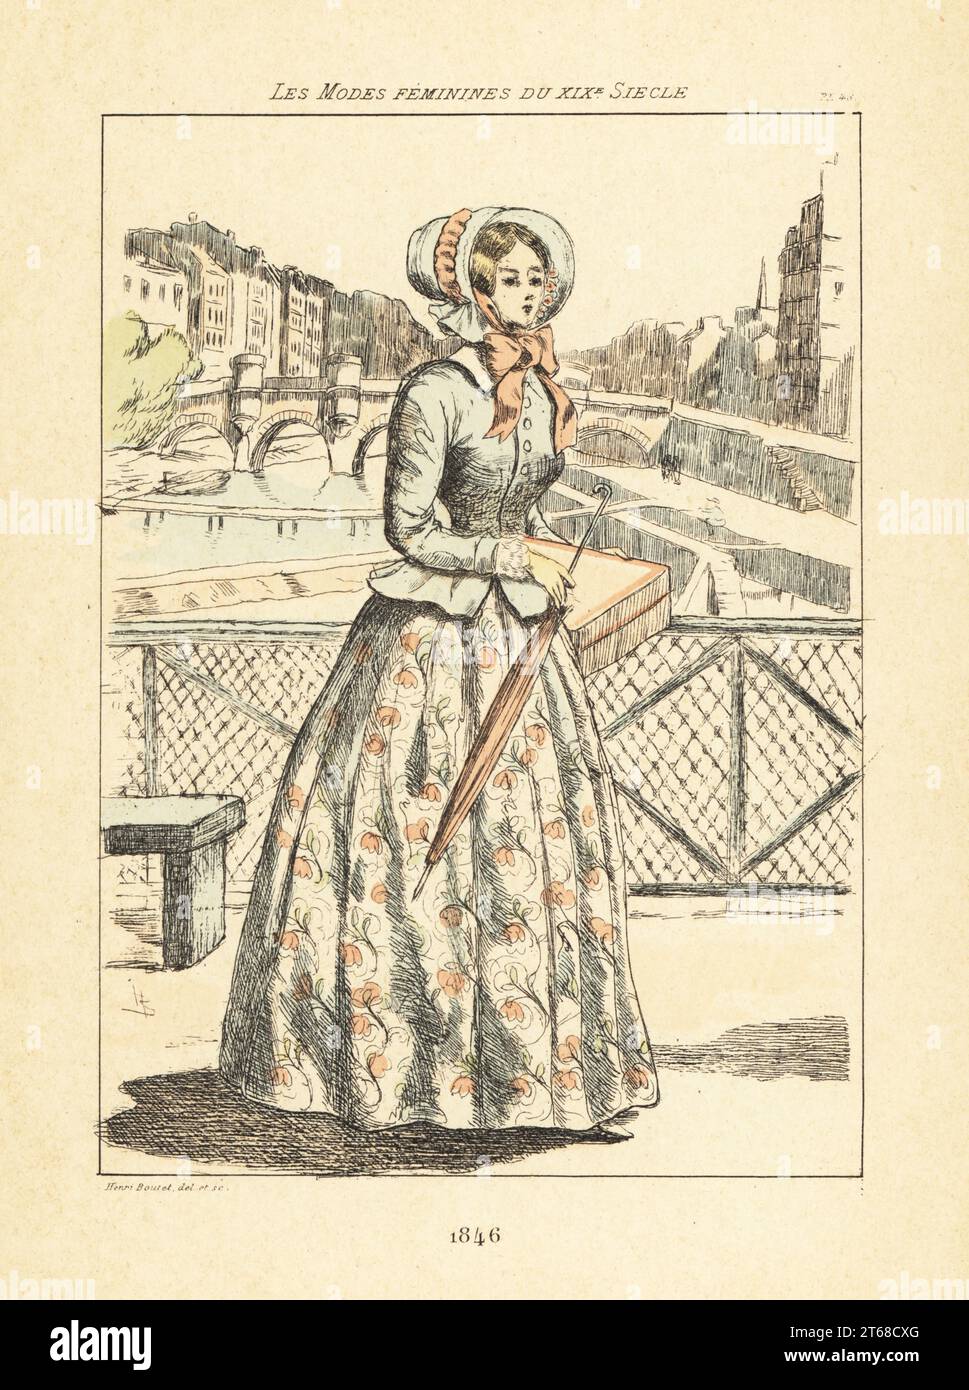 Fashionable woman on the Pont des Arts, Paris, 1846. The River Seine and the stone Pont Neuf between the Rive Guache and Ile de la Cite in the background. She wears a bonnet, fitted jacket, floral skirts, and carries a parasol and box. Handcoloured drypoint or pointe-seche etching by Henri Boutet from Les Modes Feminines du XIXeme Siecle (Female Fashions of the 19th Century), Ernest Flammarion, Paris, 1902. Boutet (1851-1919) was a French artist, engraver, lithographer and designer. Stock Photo